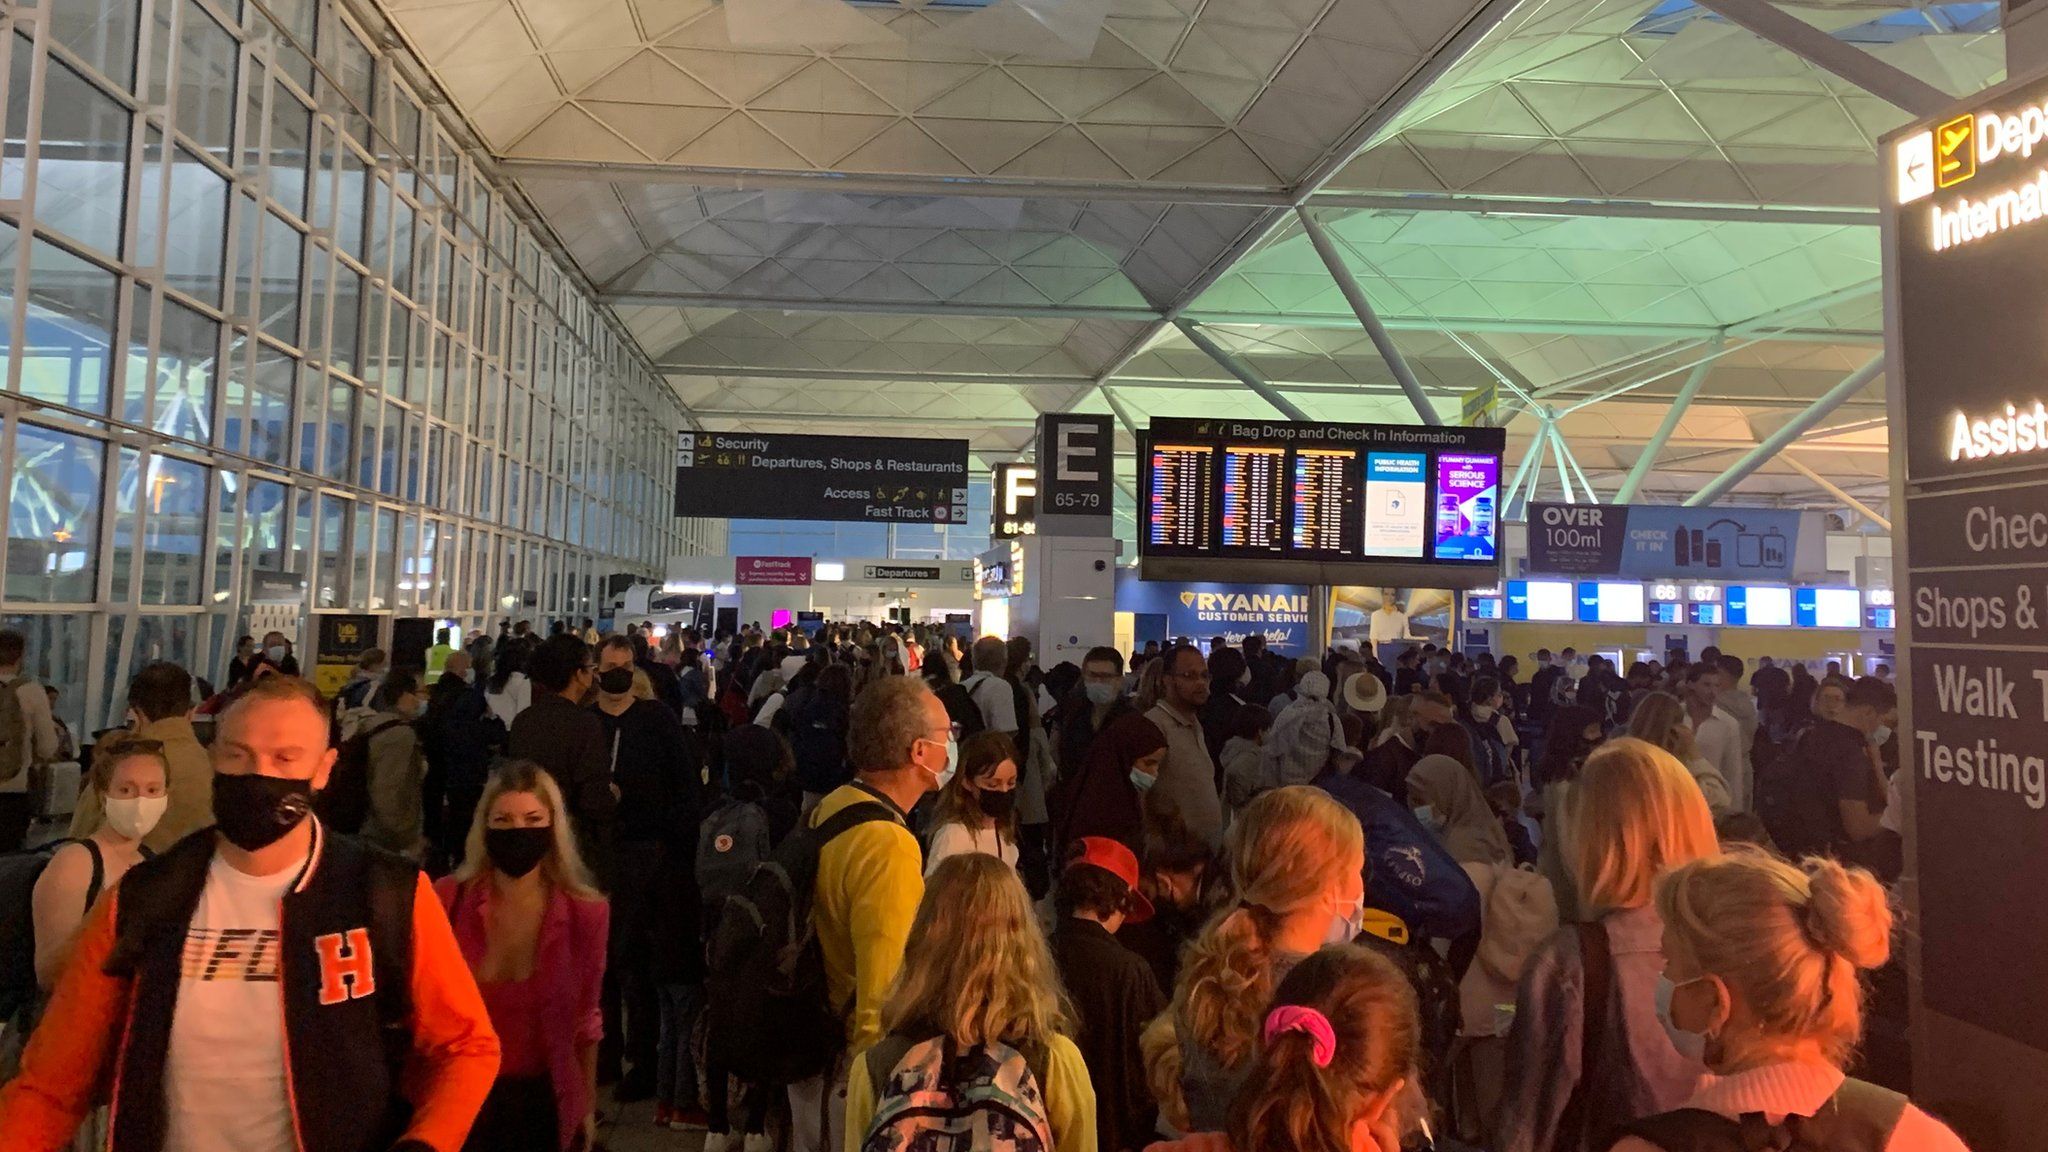 Crowds at London Stansted Airport on Saturday